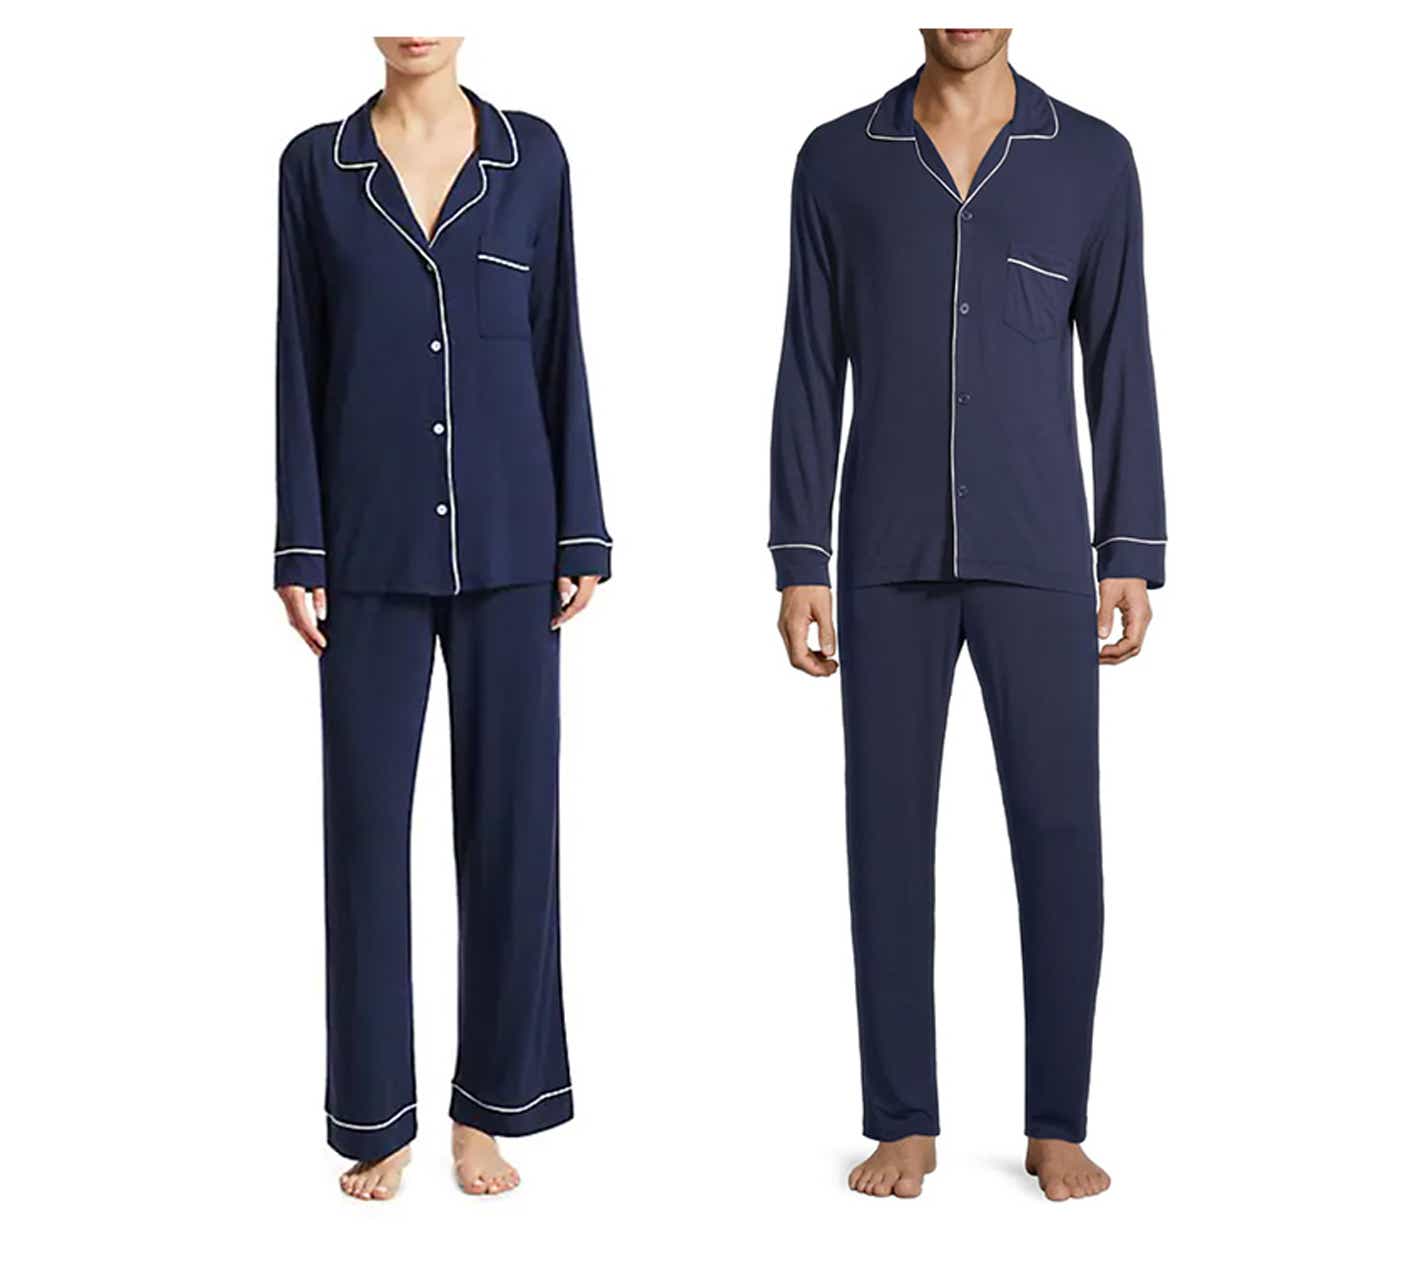 13 Best Matching Family Pajamas: Christmas PJs for Couples & Families